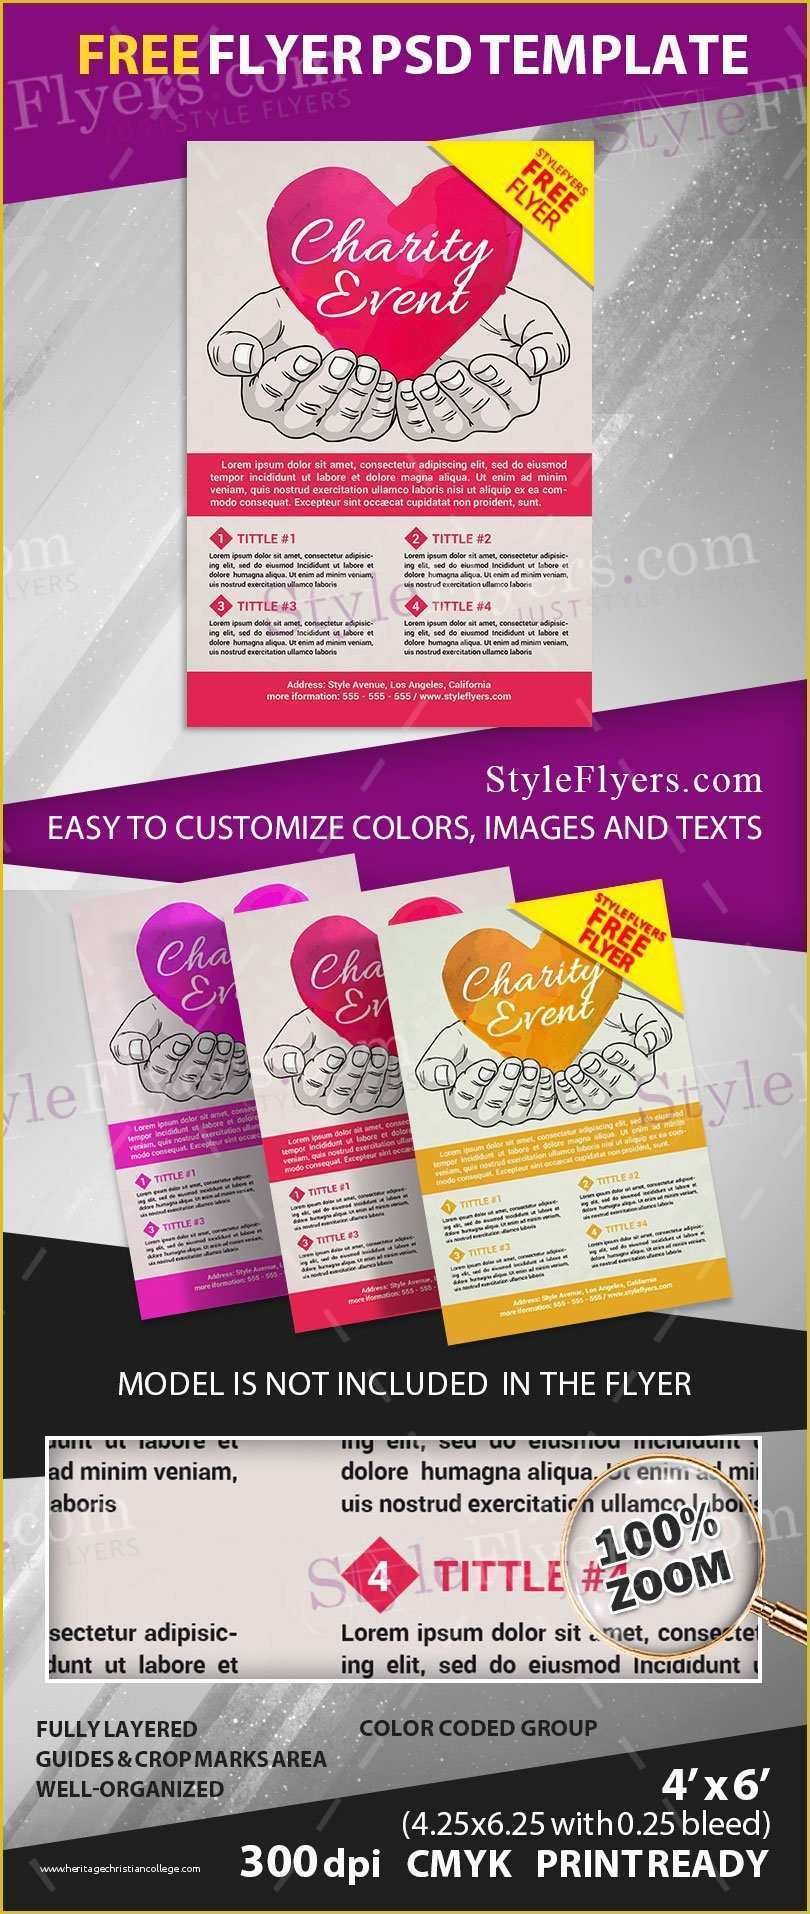 Charity Flyer Template Free Of Charity event Free Psd Flyer Template Free Download